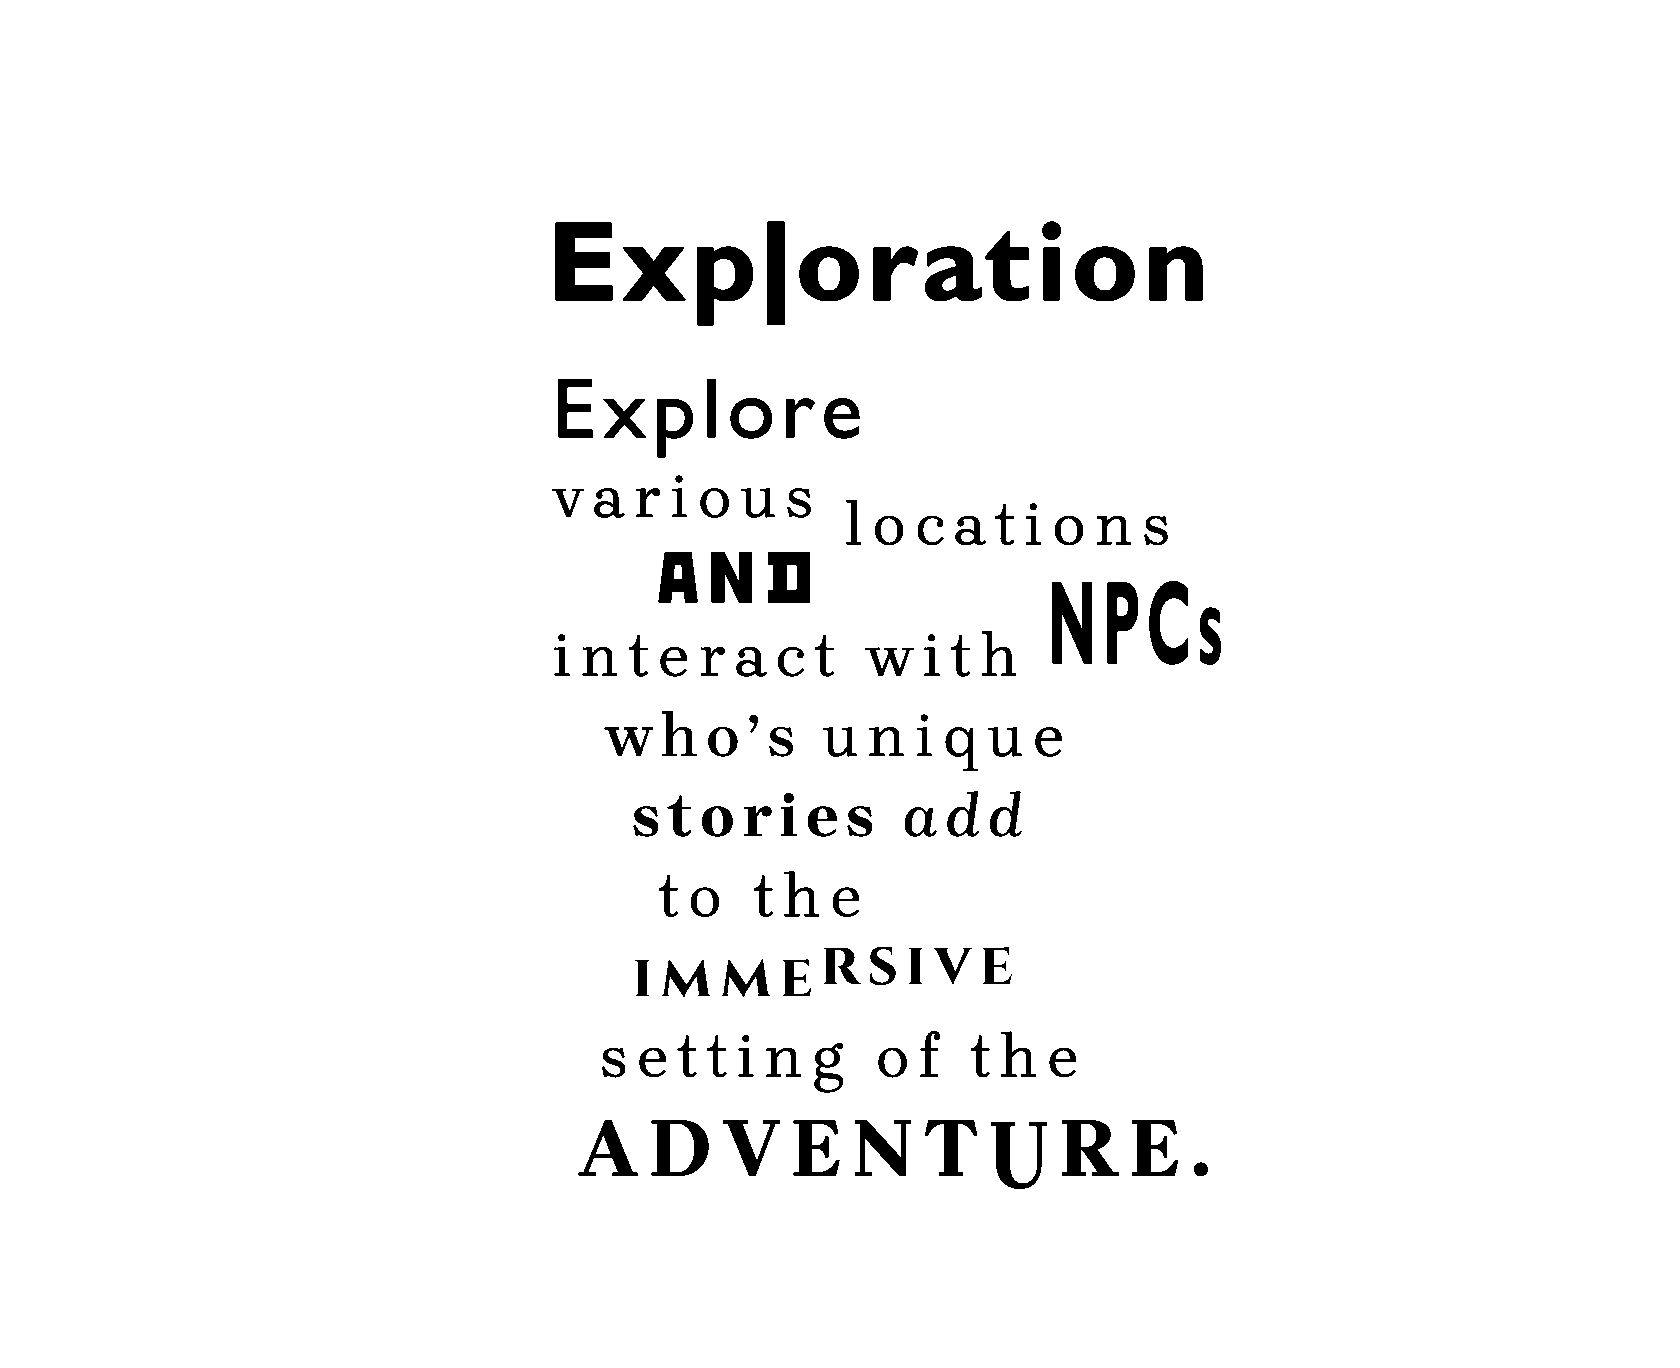 Exploration: Explore various locations and interact with NPCs who’s unique stories add to the immersive setting of the adventure. 